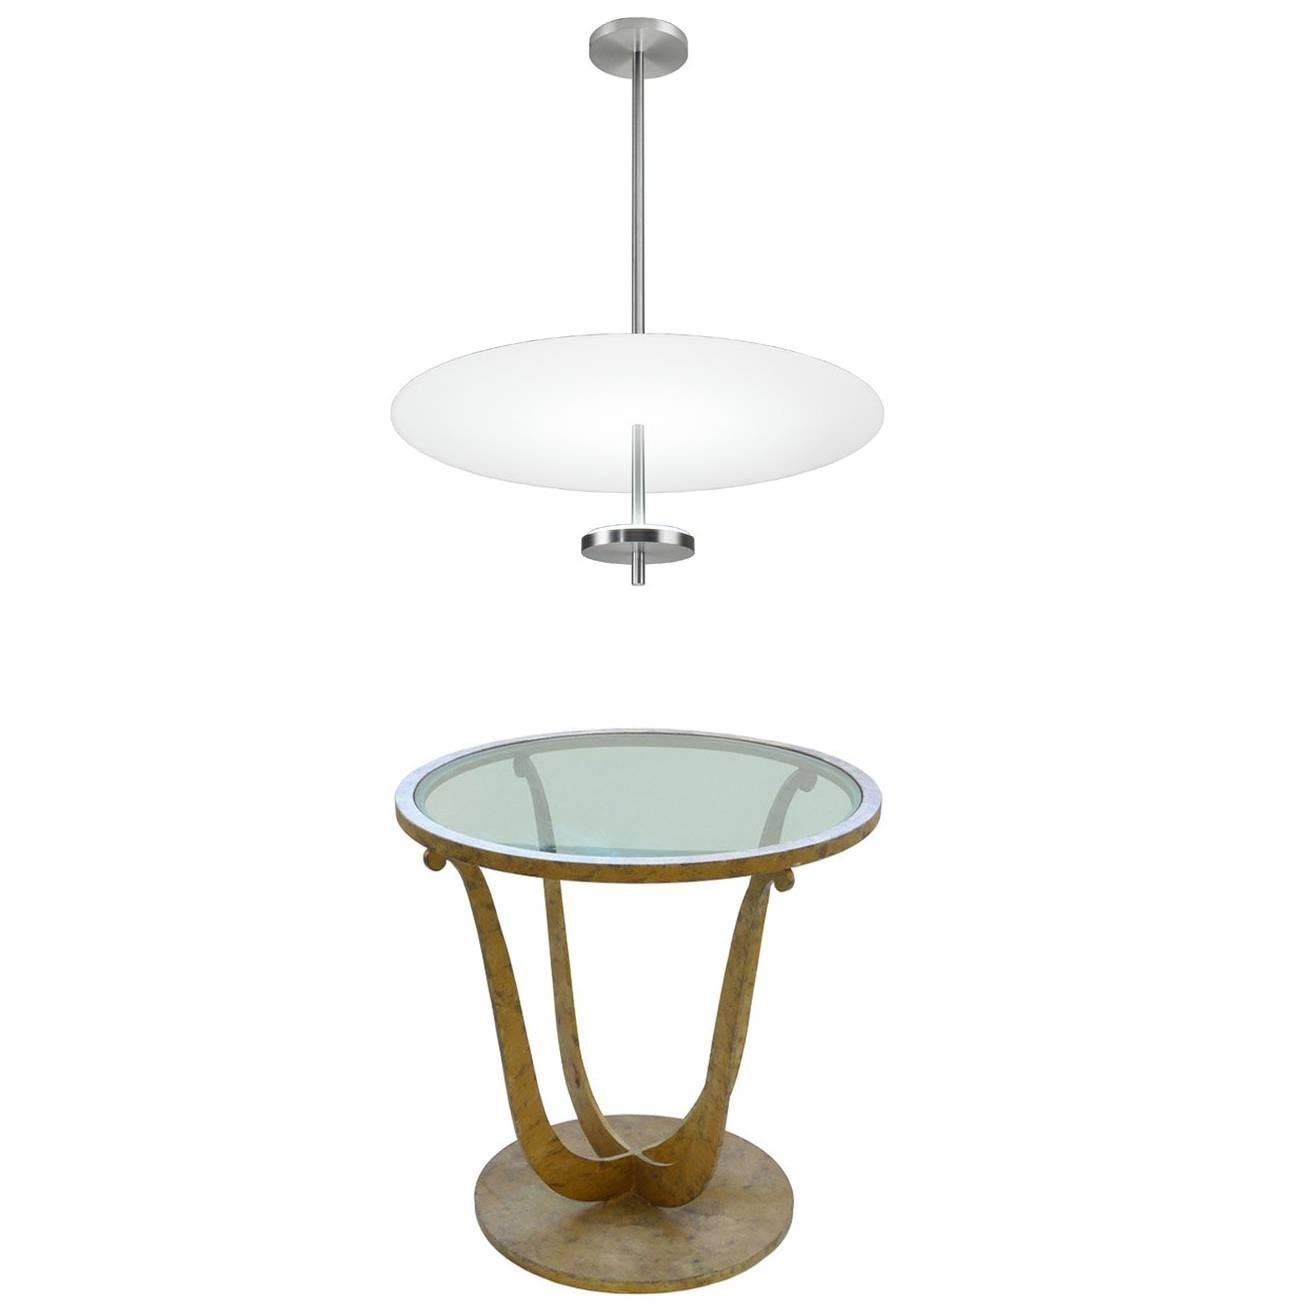 Art Deco Style Gilt Metal Round Gueridon Table with Round Glass Pendant Light For Sale